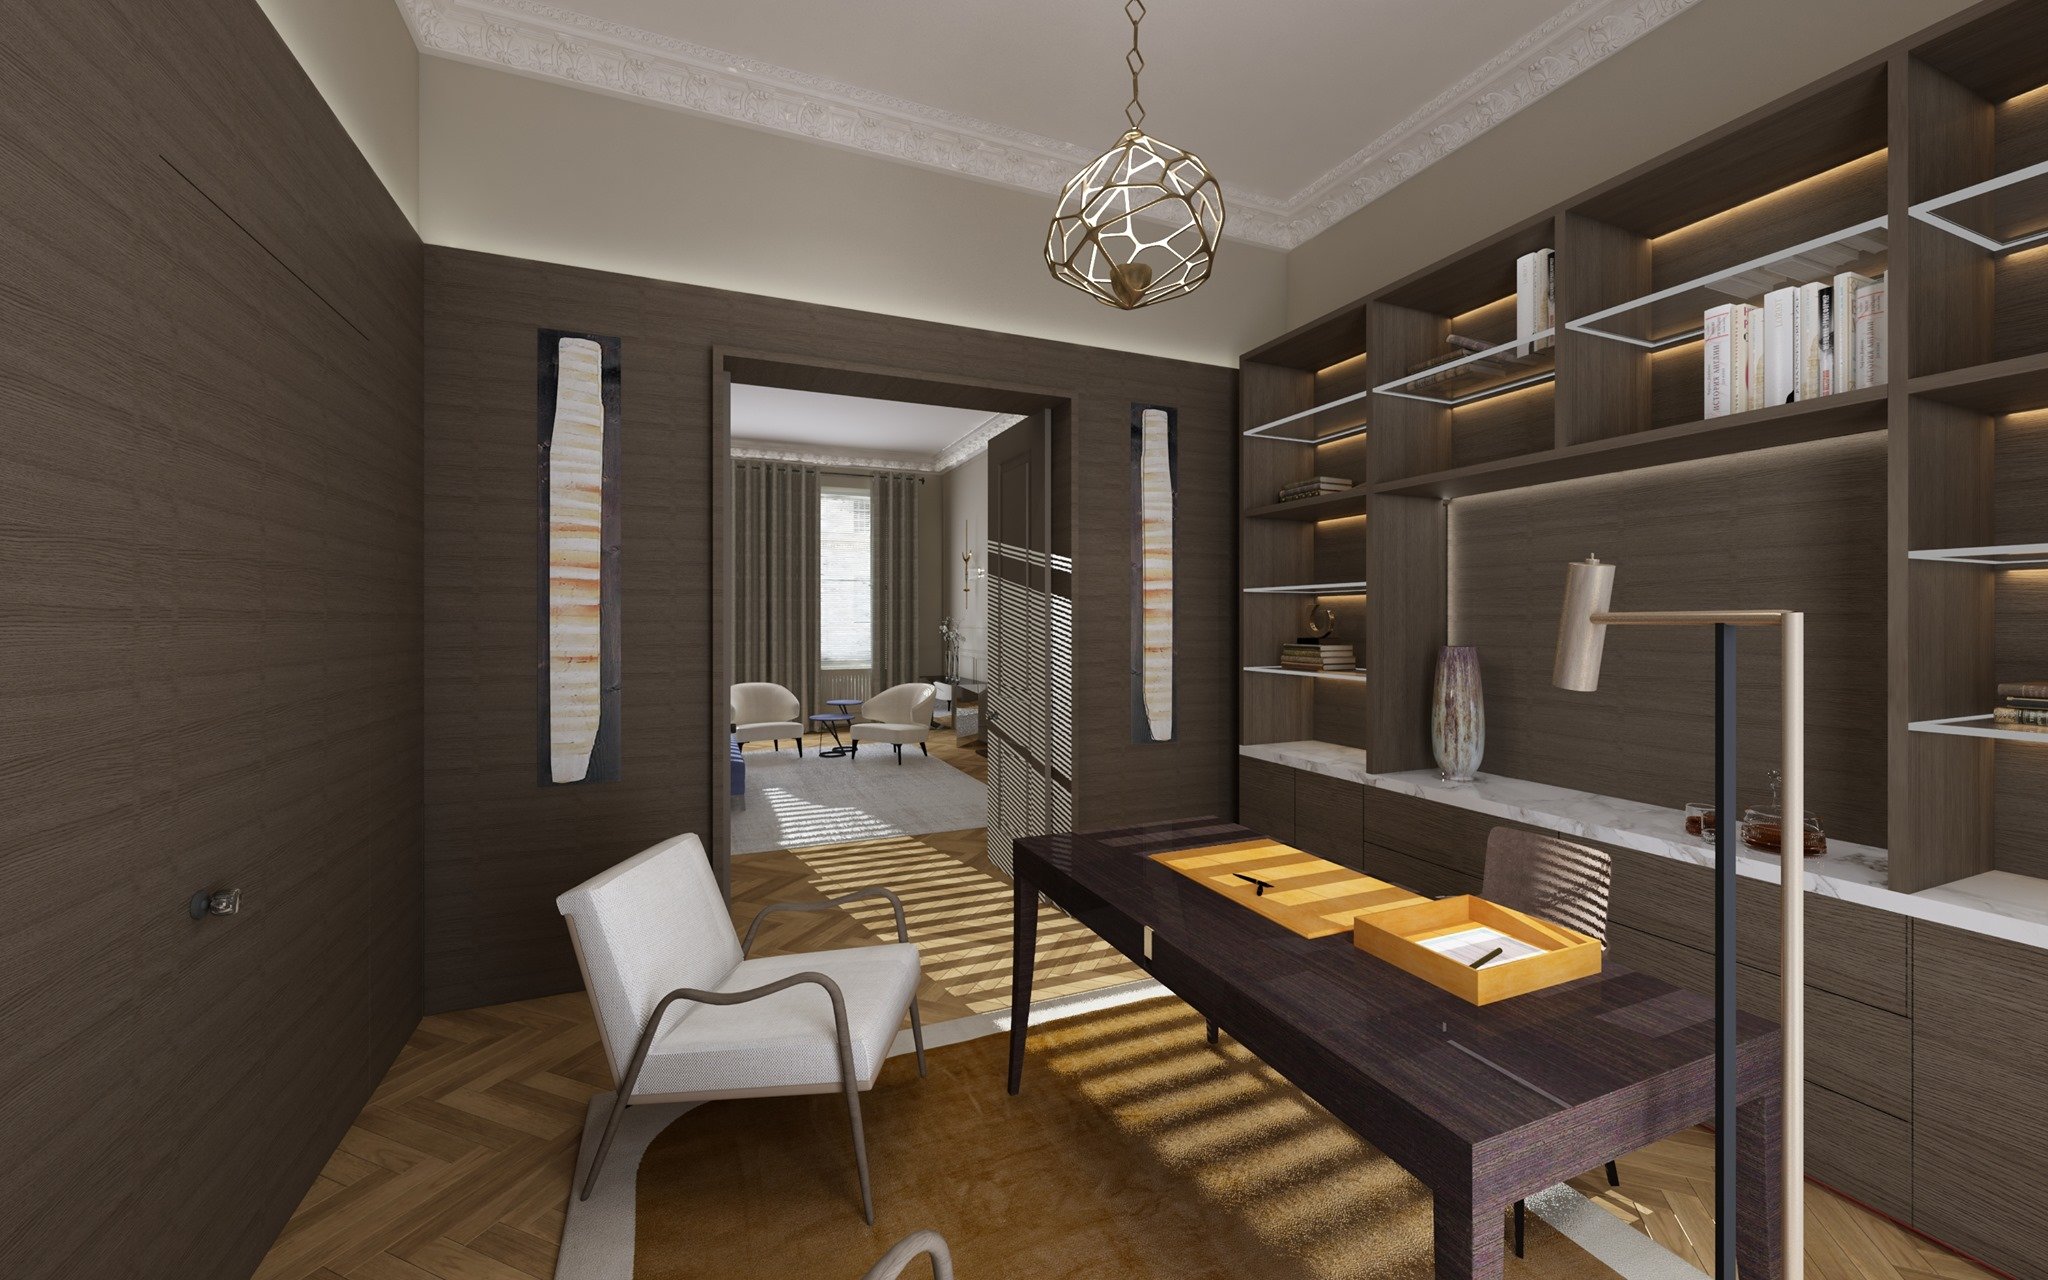 SketchUp Training Course for Interior Designers and Architects